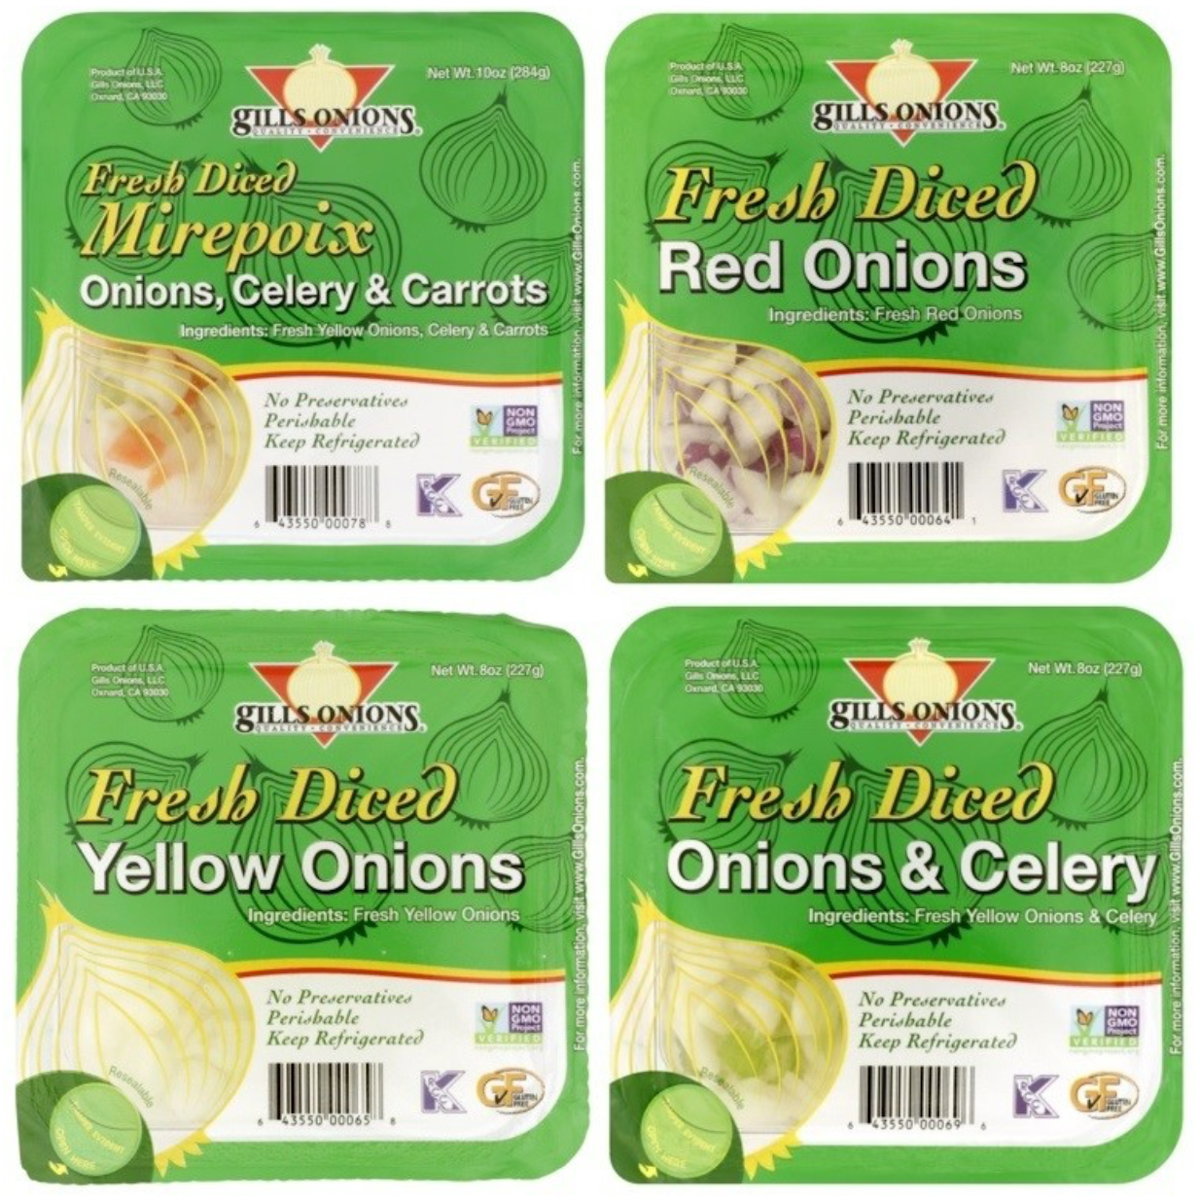 Gills Onions recalls products related to nationwide Salmonella outbreak